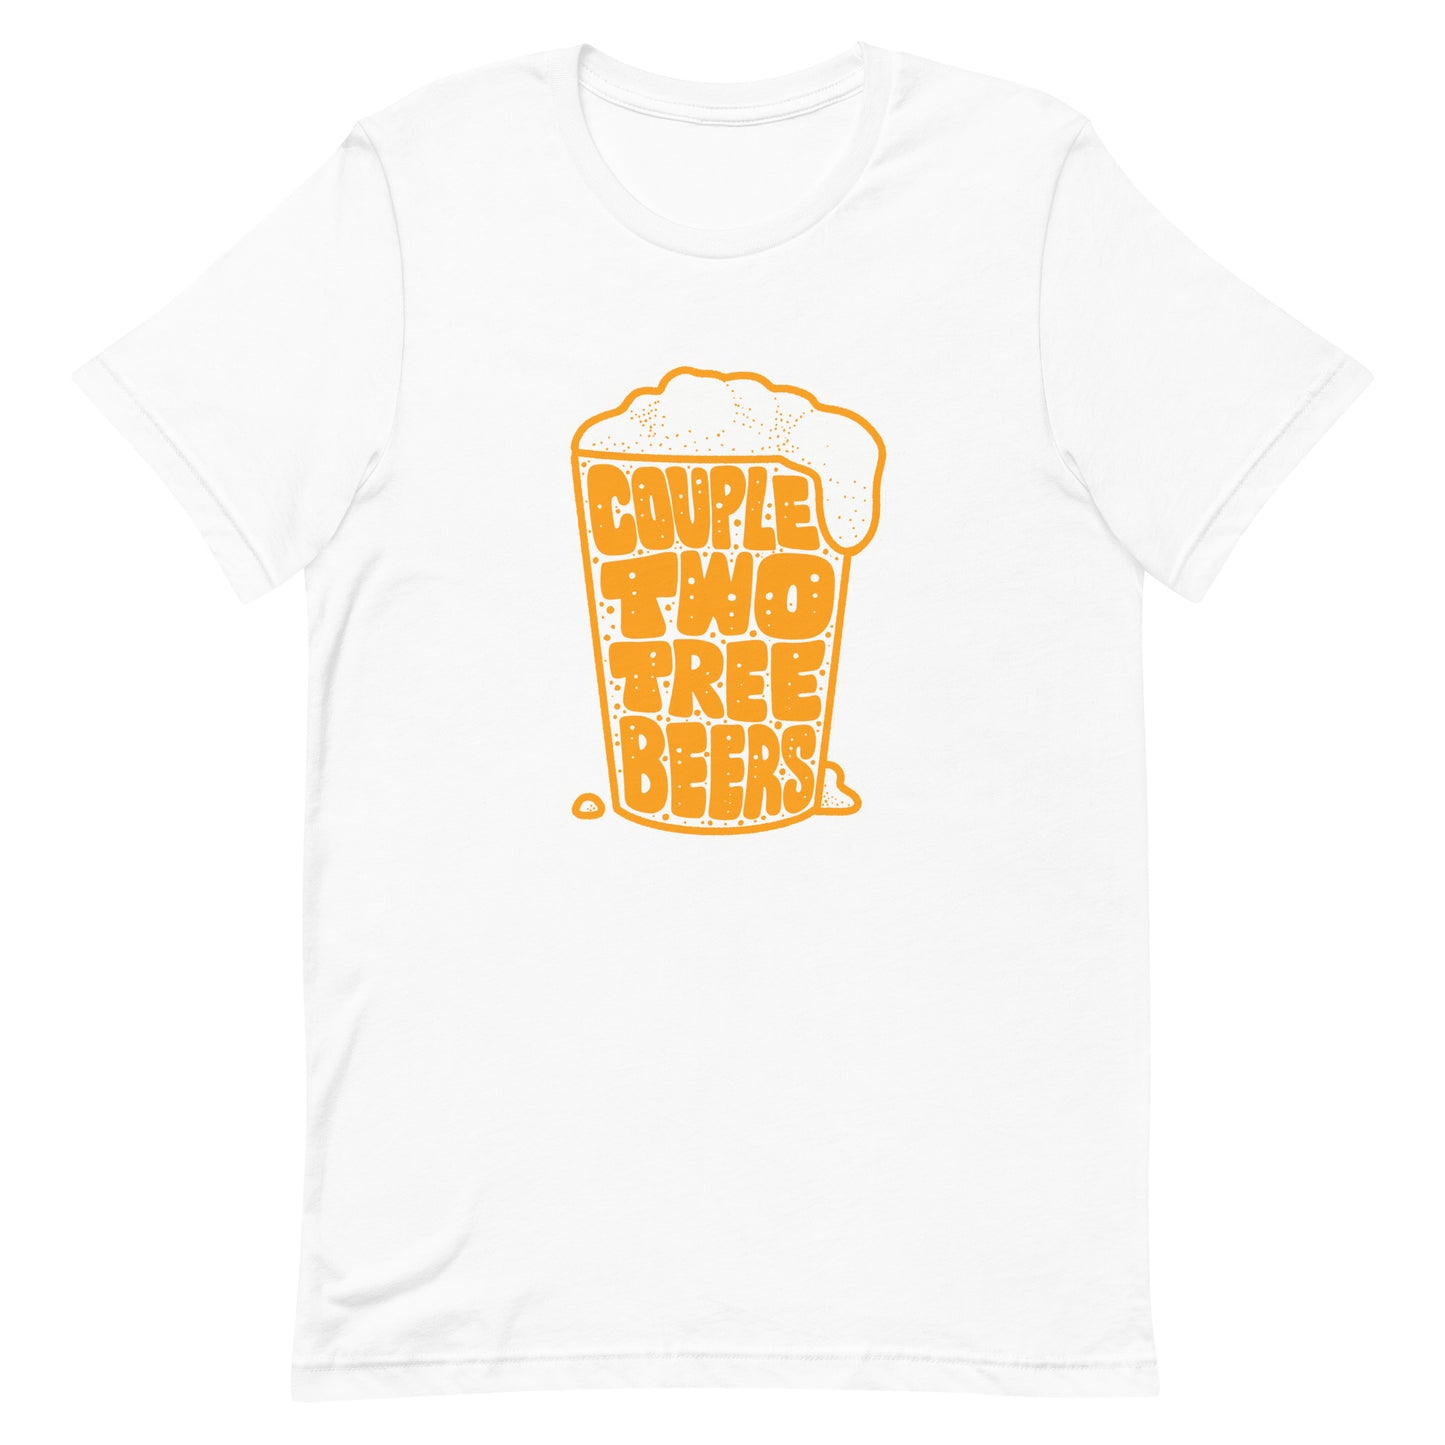 Couple two tree beers - Midwest Beer Drinking T-shirt